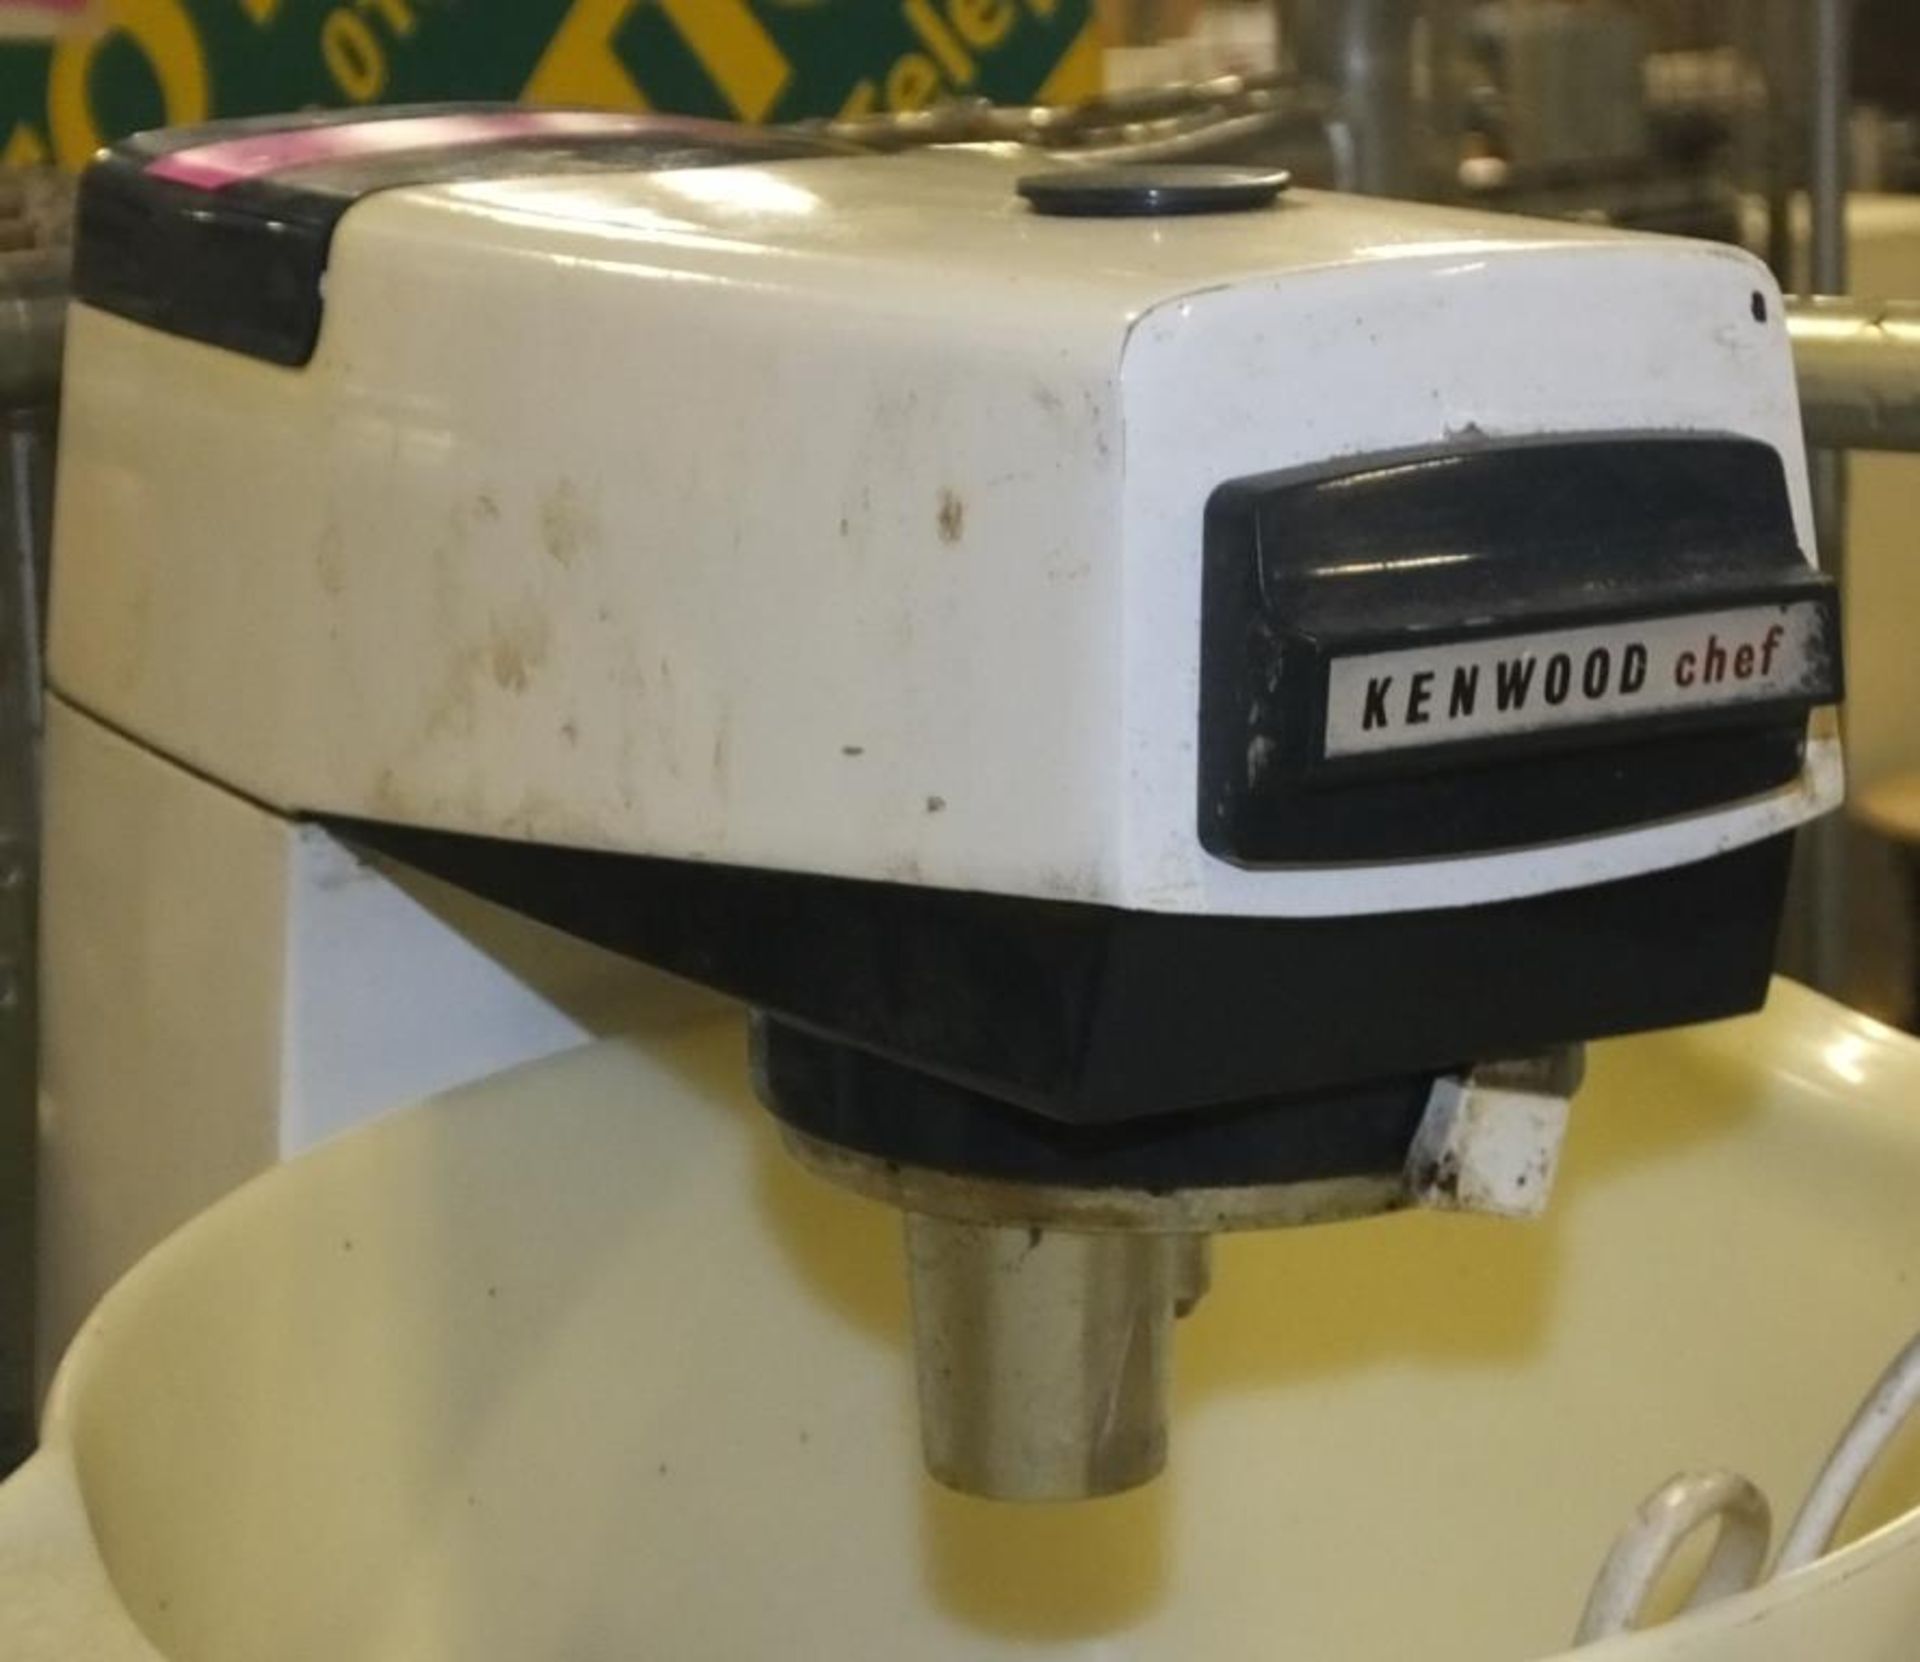 Kenwood chef retro food mixer - 2 attachments - Image 2 of 2